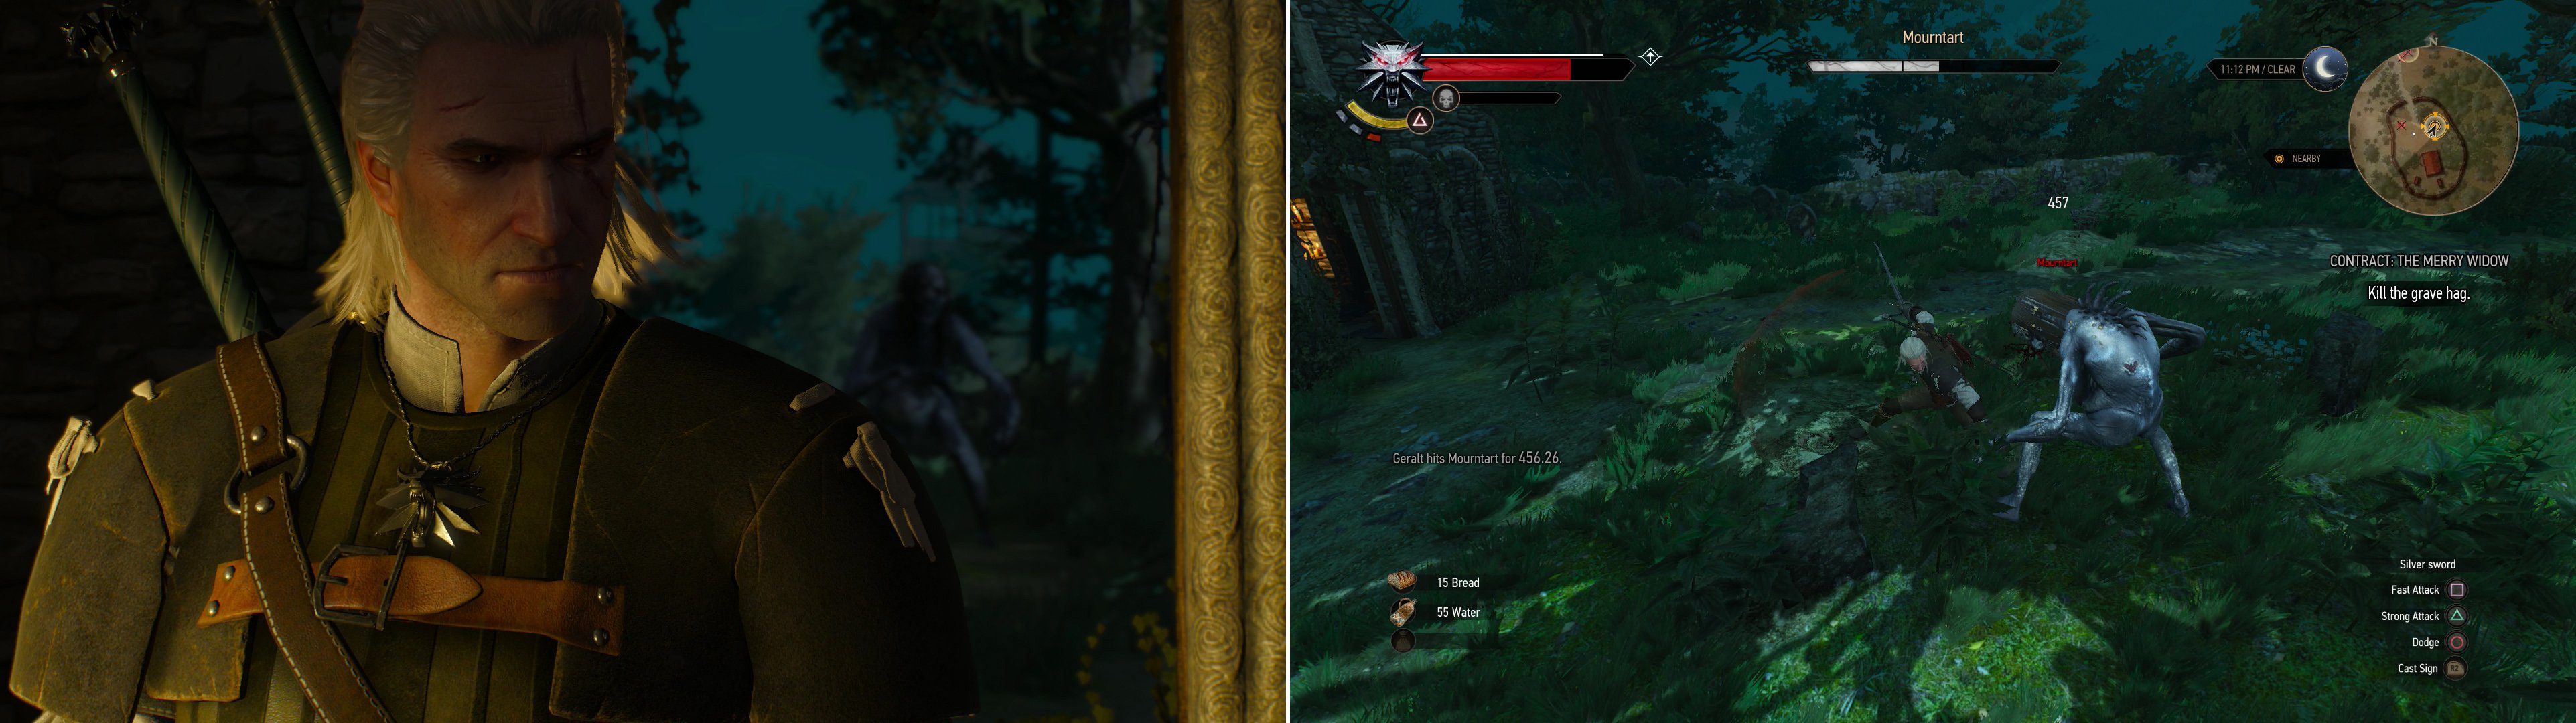 Take the Grave Hag Skulls to lure the beast out into the open (left) then teach her to fear a Witcher's blade (right).